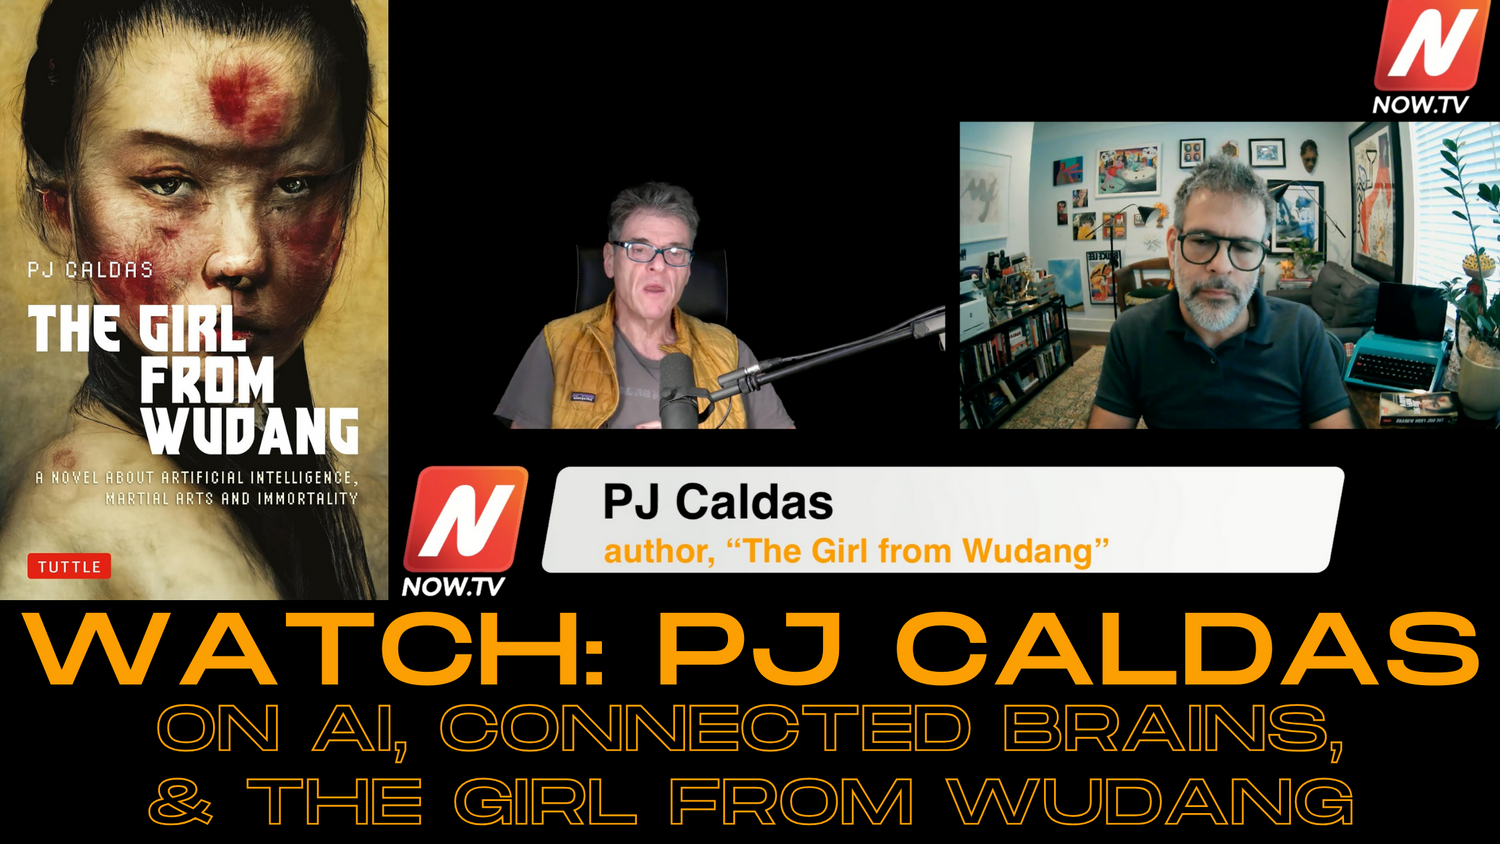 WATCH: PJ Caldas on AI, Connected Brains, and The Girl From Wudang